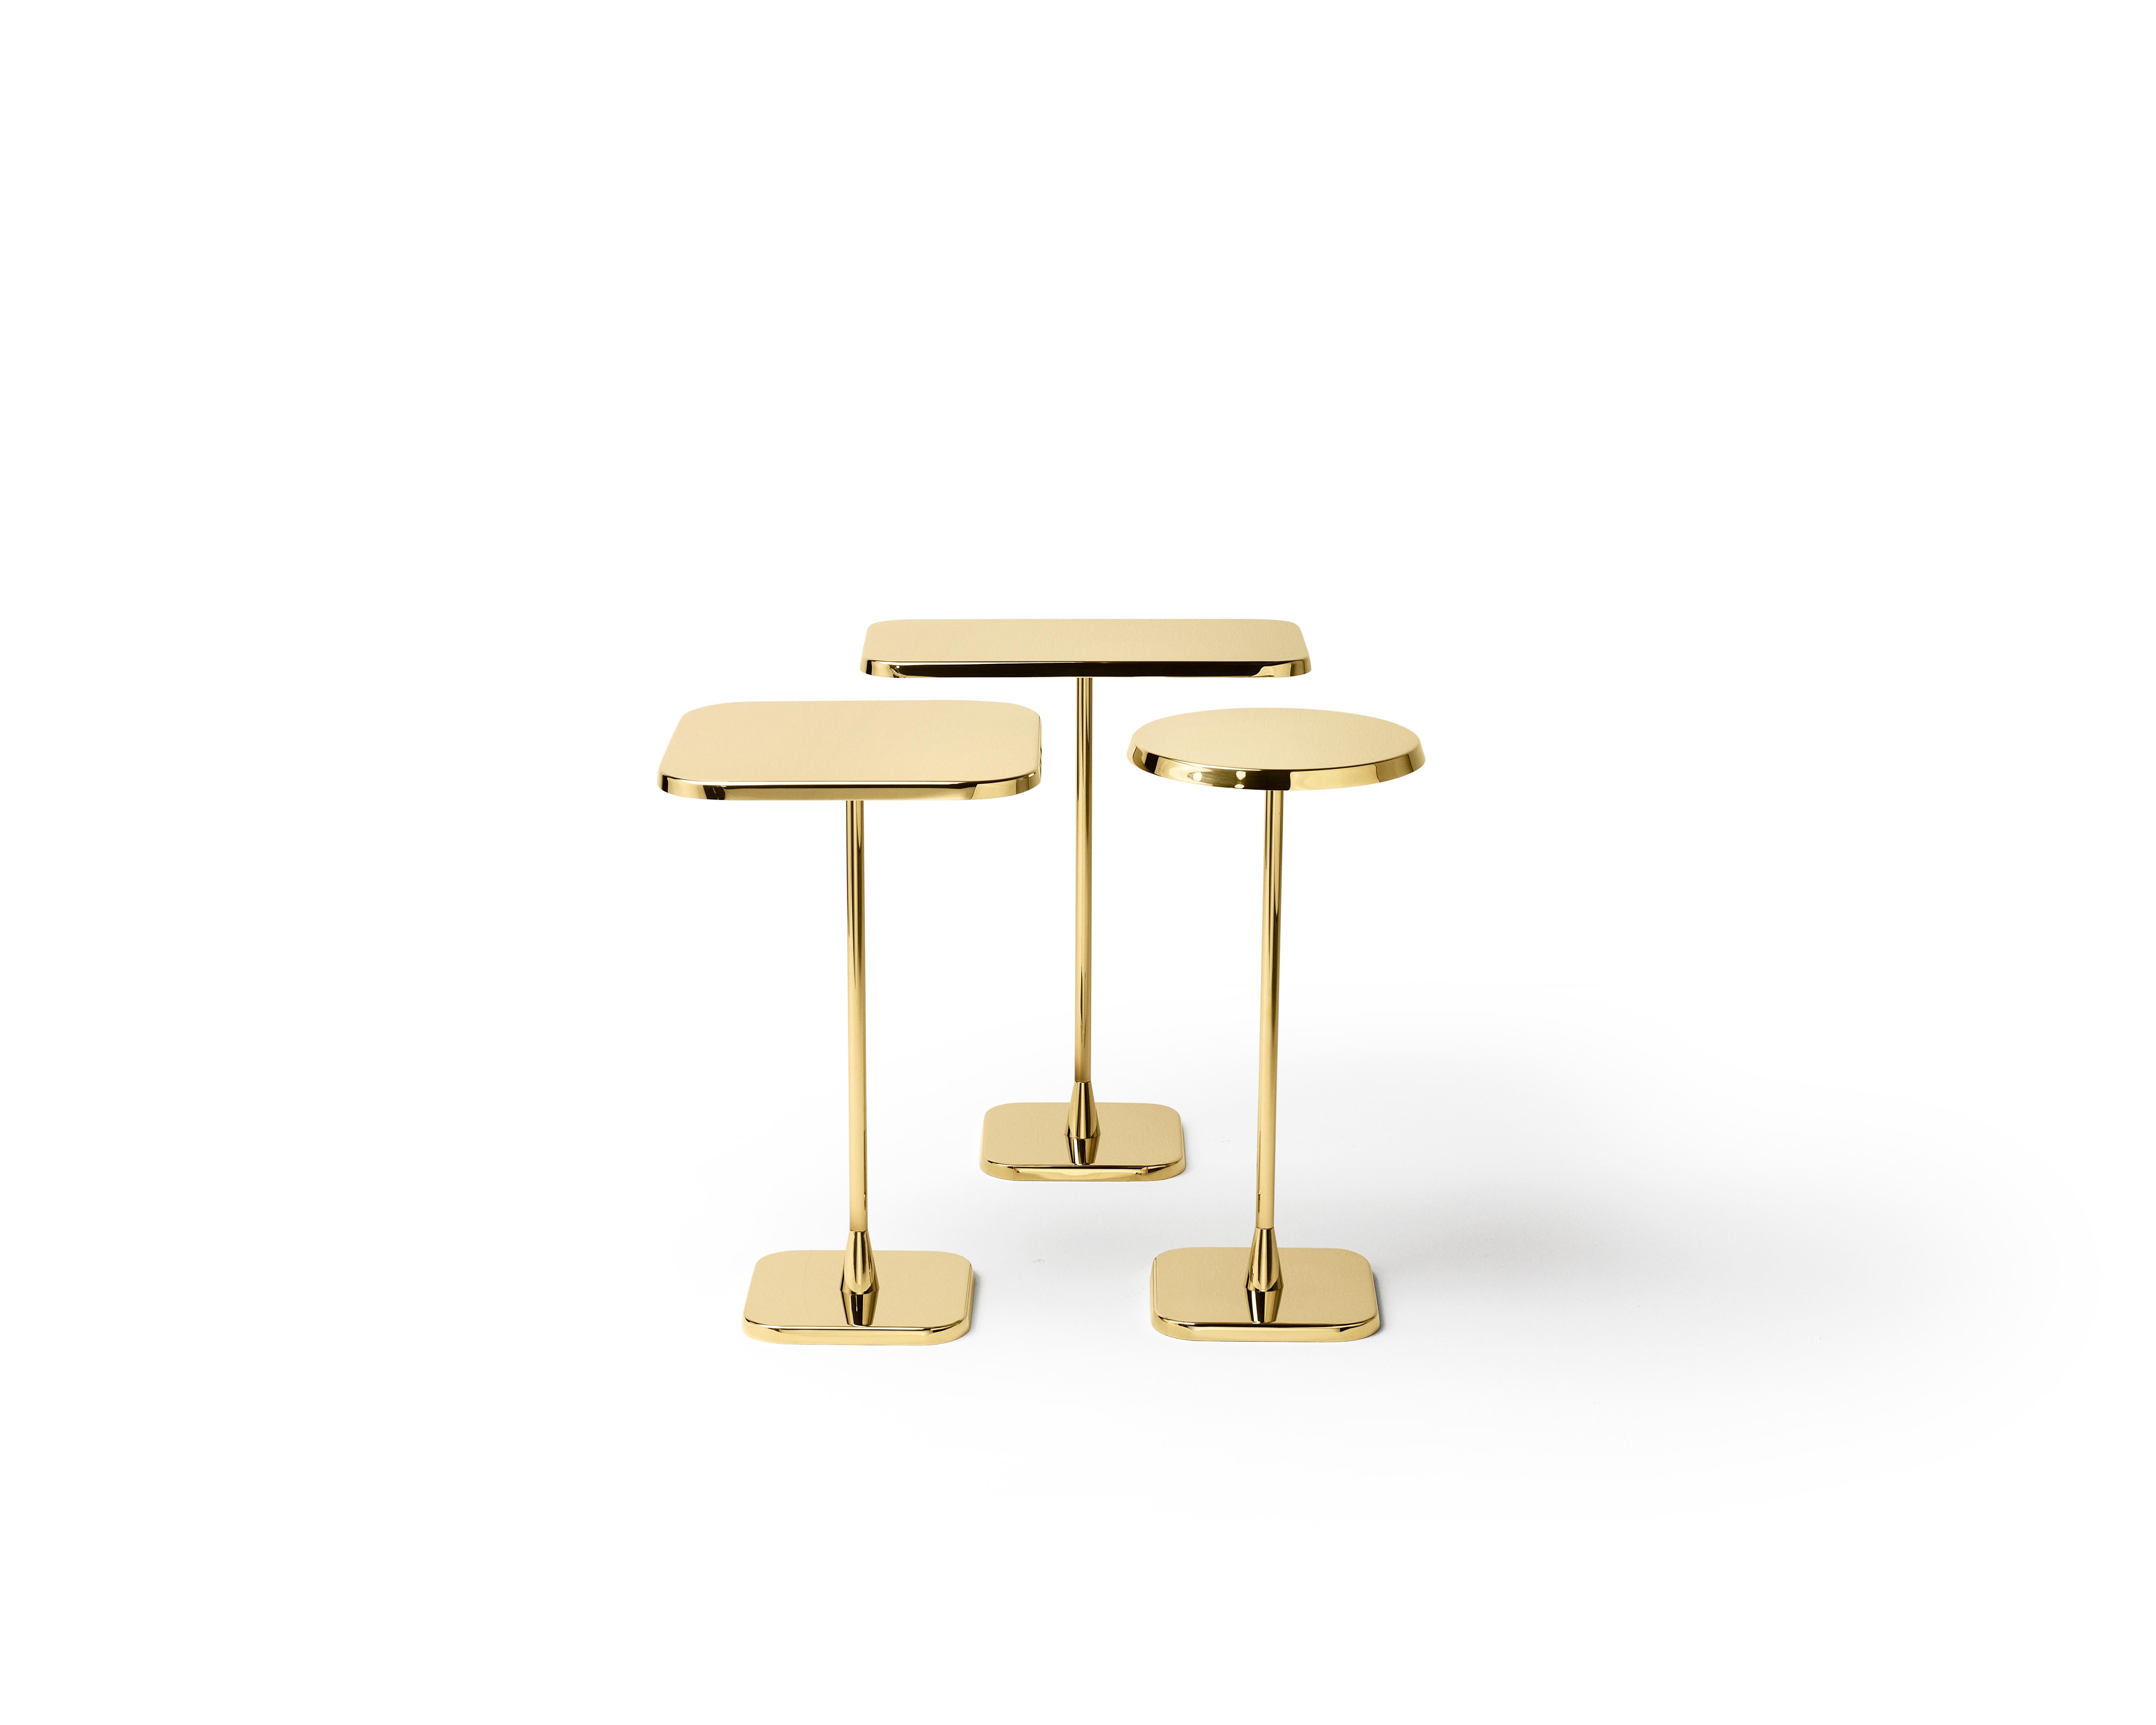 Squared table in stainless steel
For the interior design of the Dutch national Opera and ballet Hutten designed these simple yet elegant and very useful side tables.

Material:
Stainless steel with pvd treatment stainless steel with pvd